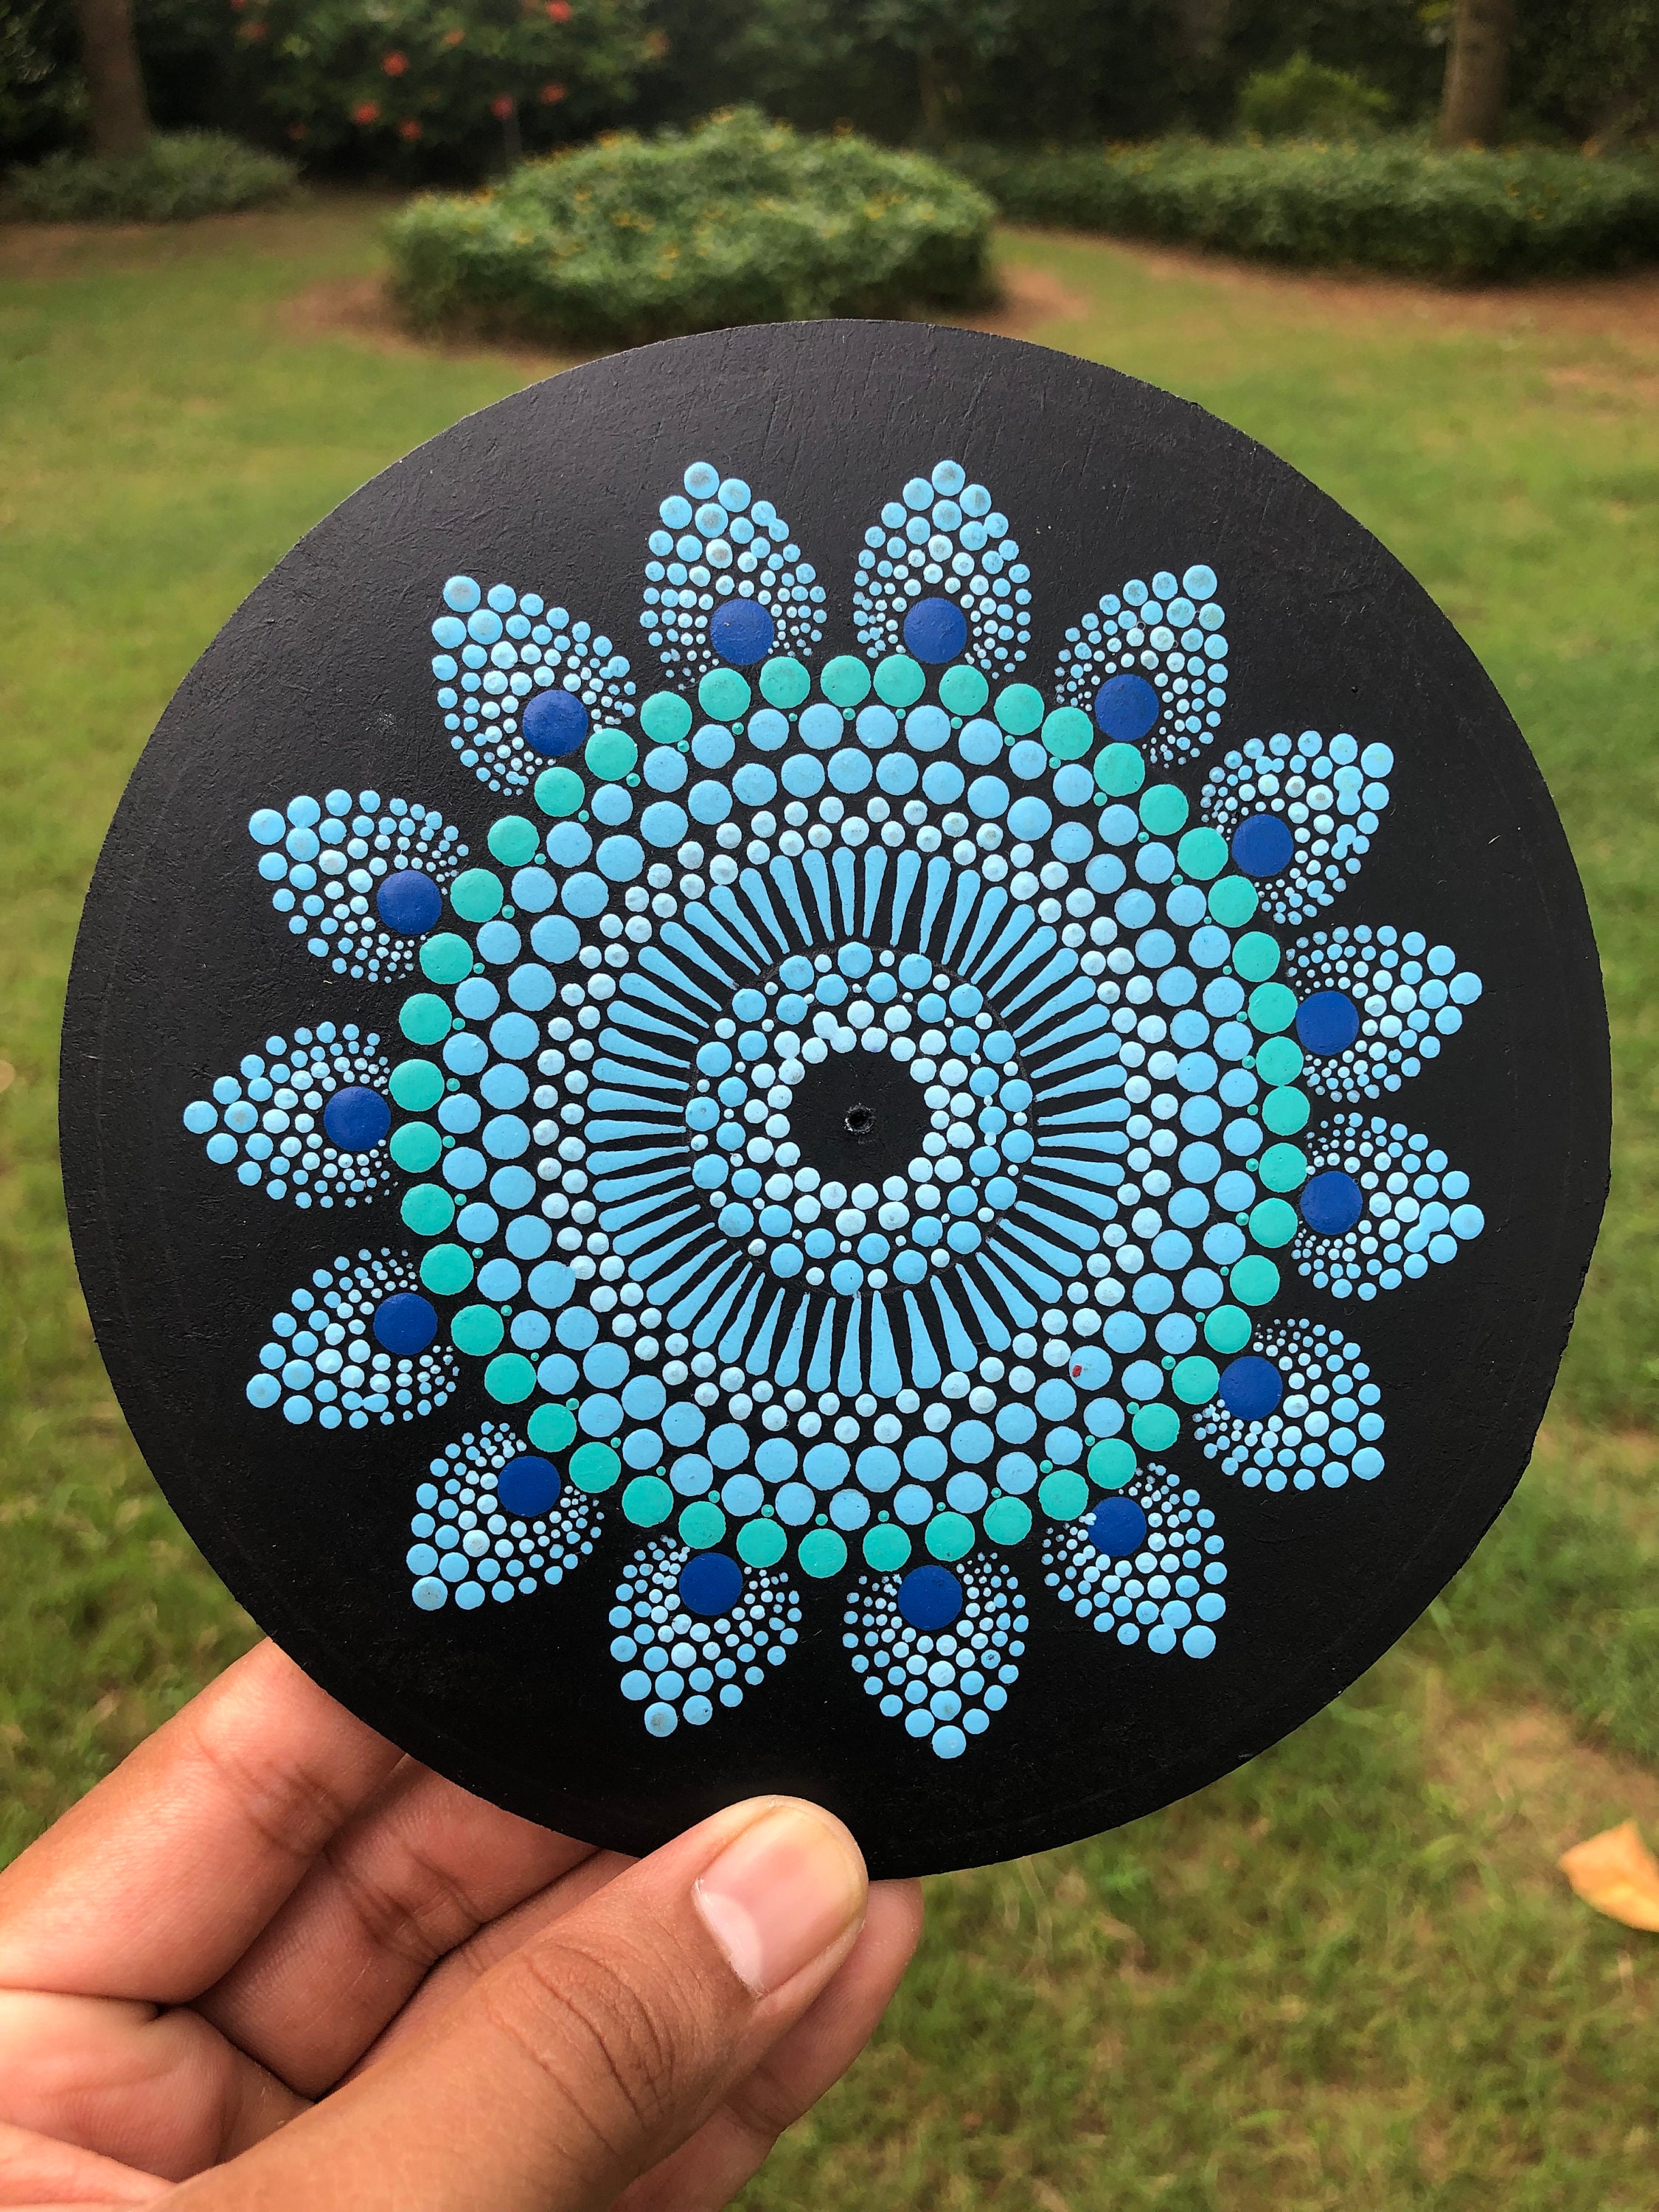 Paint Your Own Mandala Art Coasters, Pack of 6 Coasters 6+ Years at Rs  389.00, हैंडमेड क्राफ्ट, हाथ से बना क्राफ्ट - Adhyat Solutions Private  Limited, Bengaluru